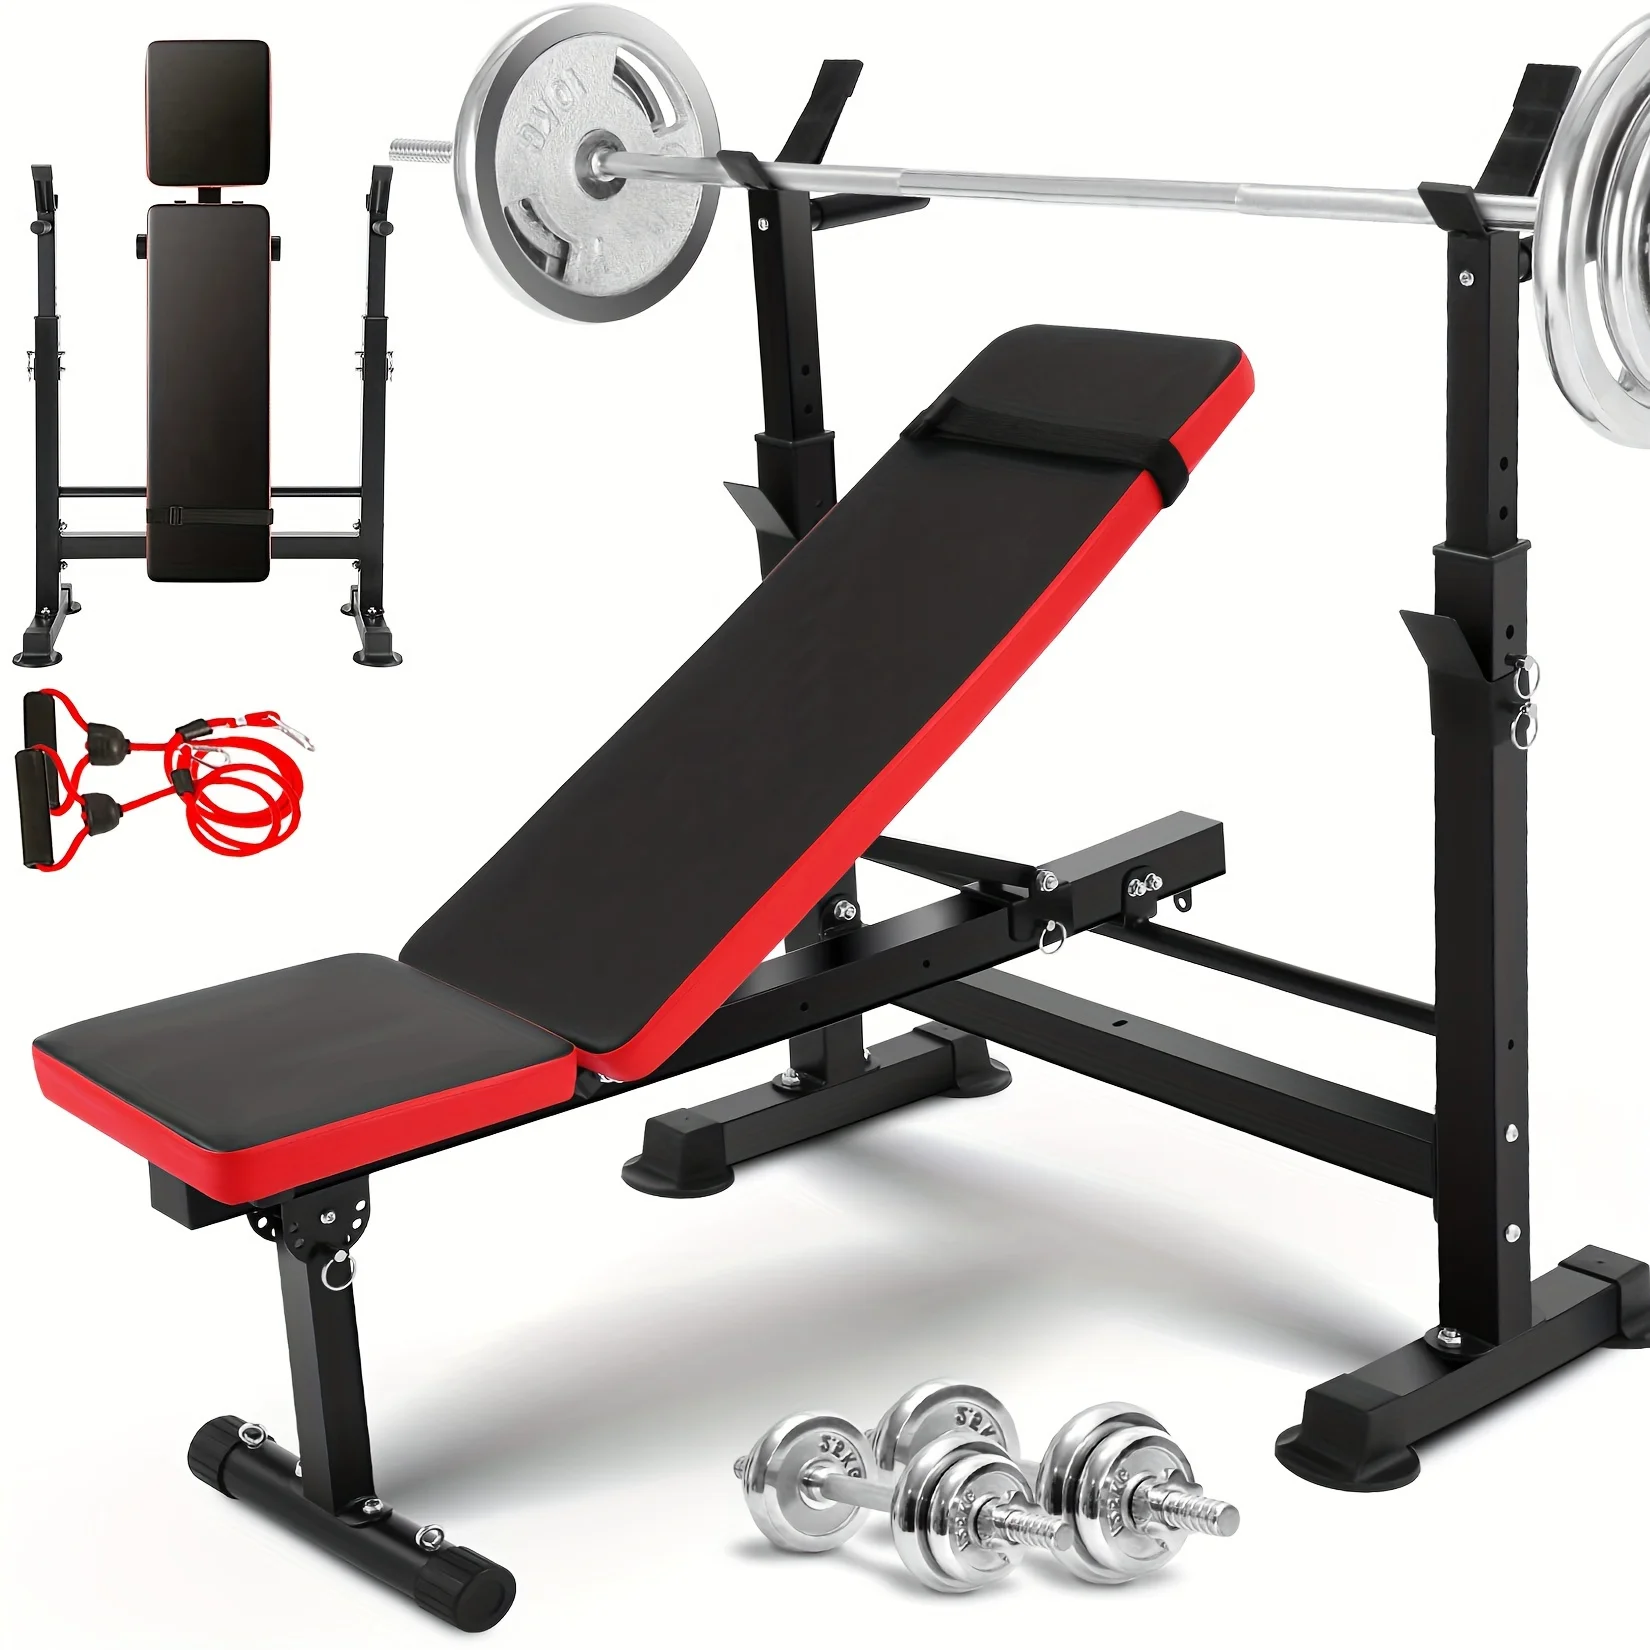 

6 in 1 Weight Bench Adjustable Workout Bench Press with Barbell Rack Strength Training for Home Gym Full Body Workout Lb dumbell